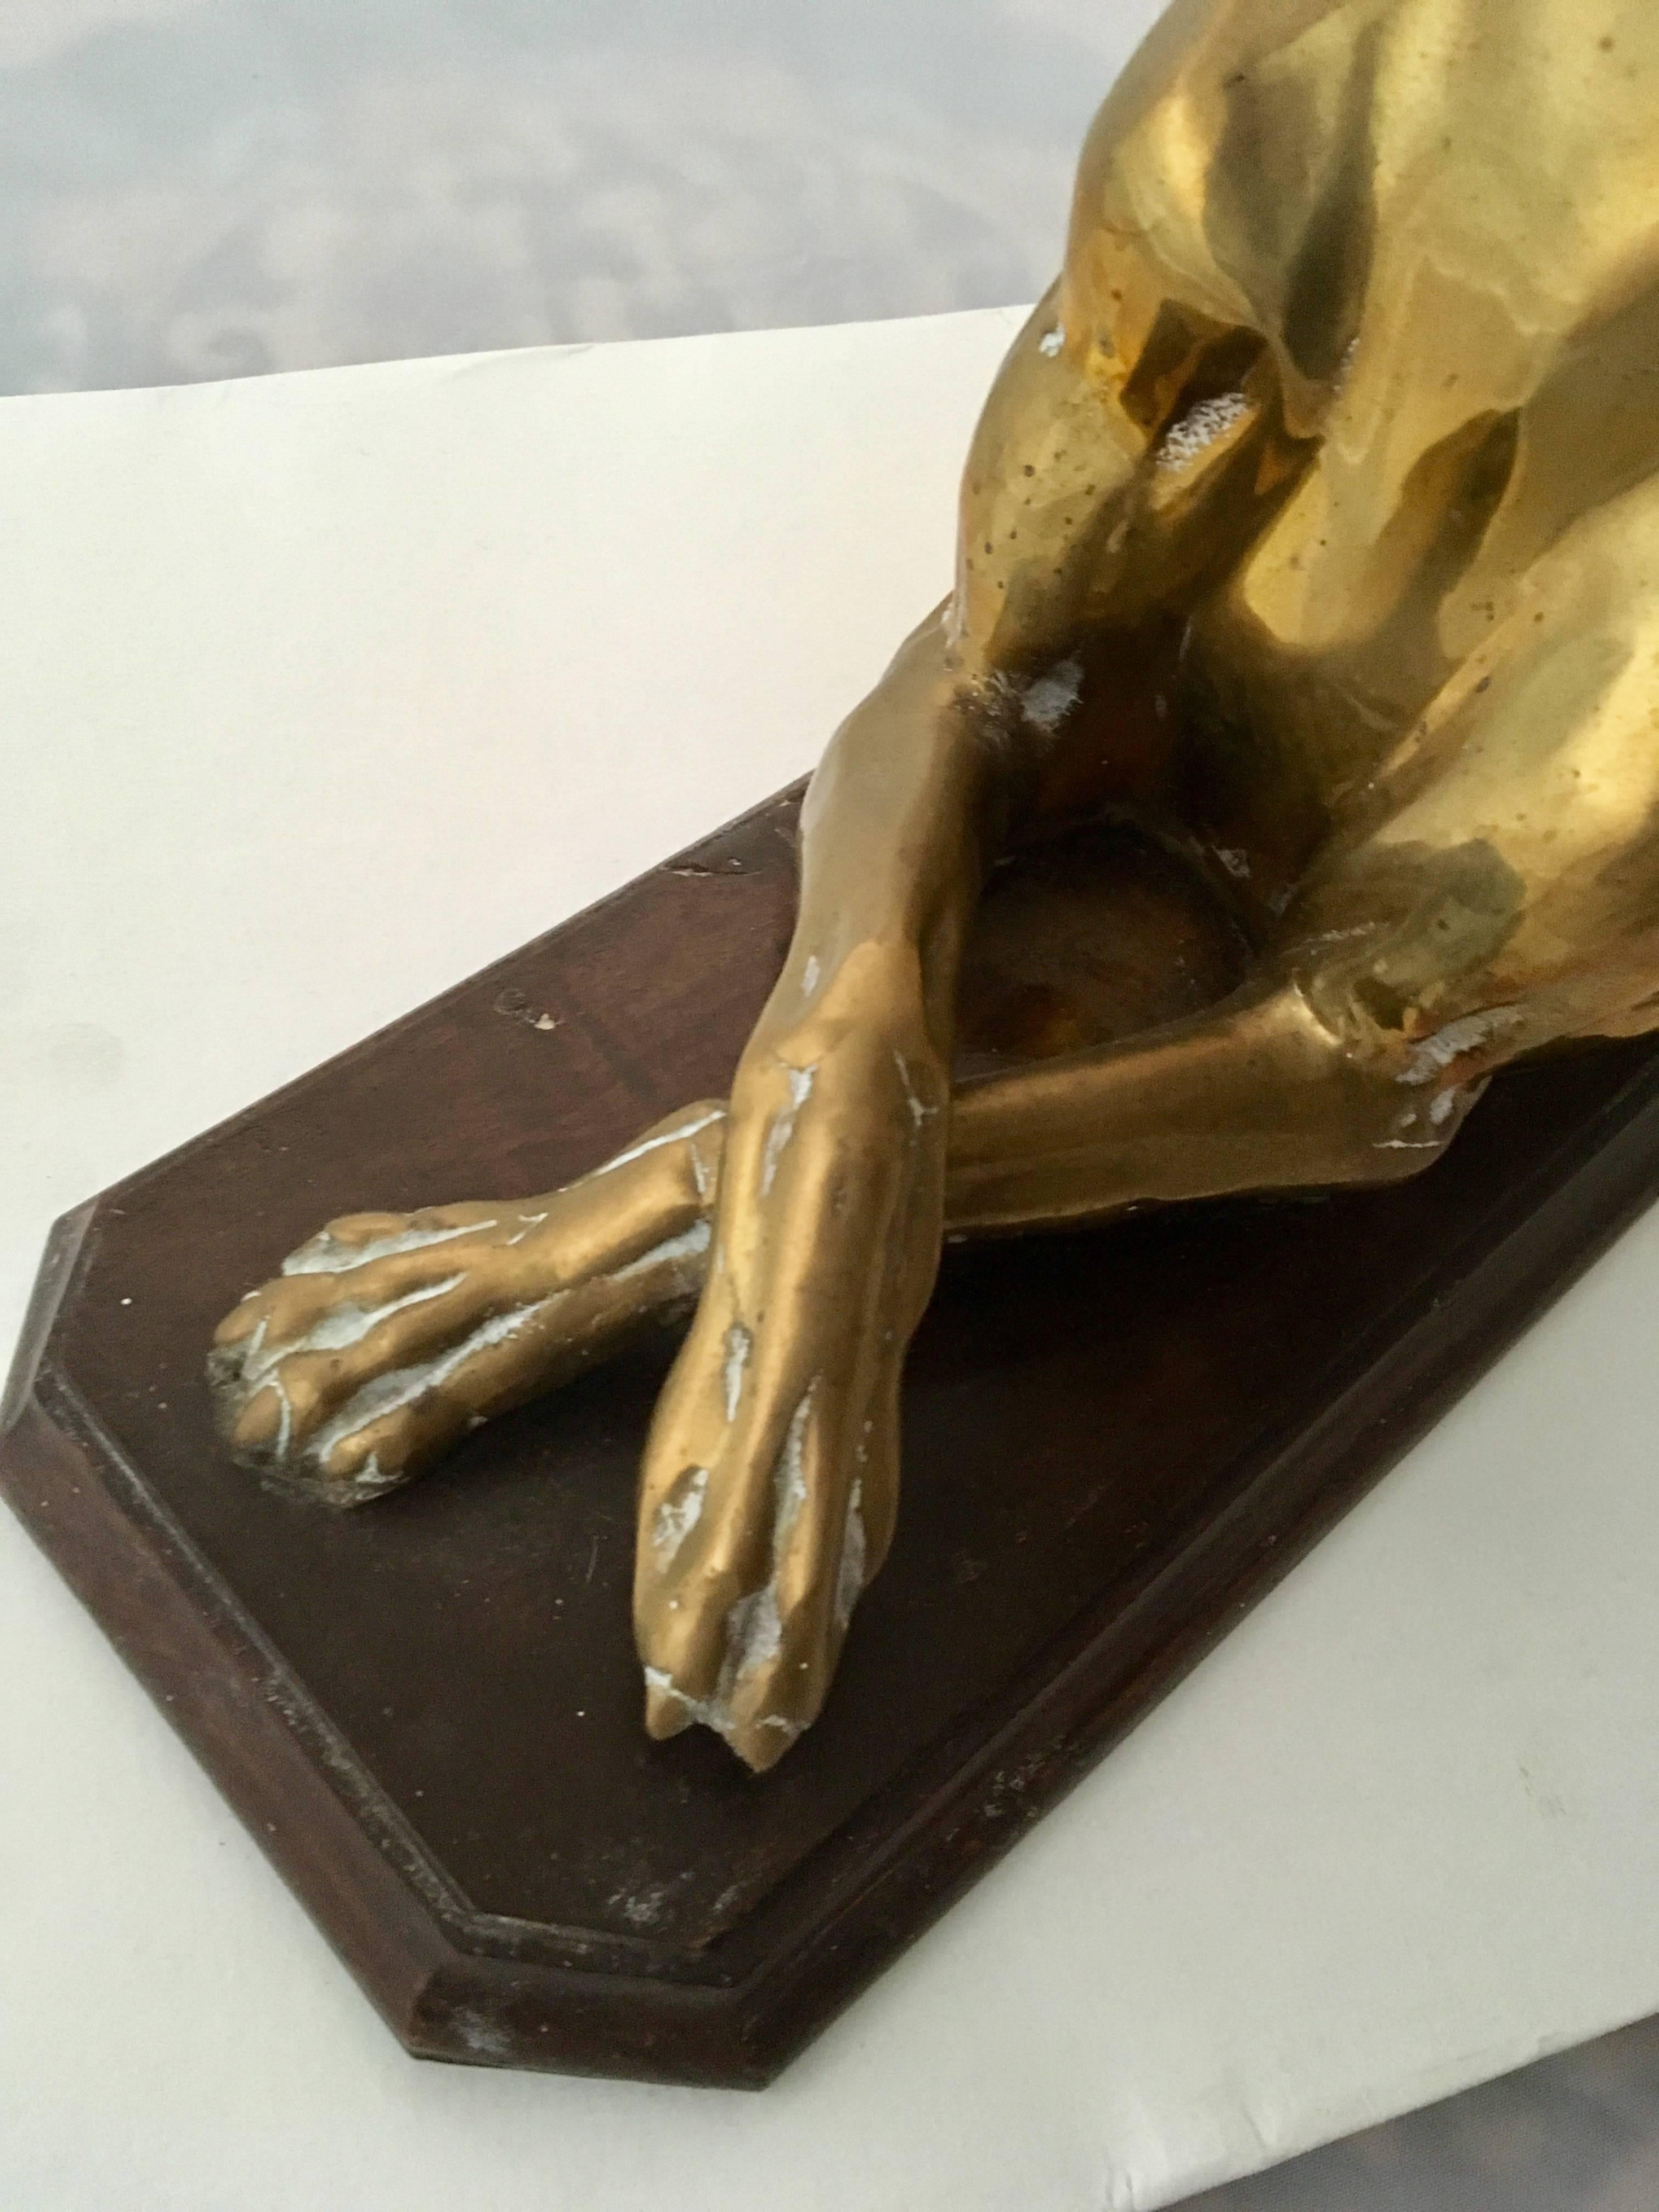 Art Deco brass sculpture of a whippet or greyhound, mounted on original mahogany base. Fine detail. A centerpiece sculpture, but could also be used as a door stop.